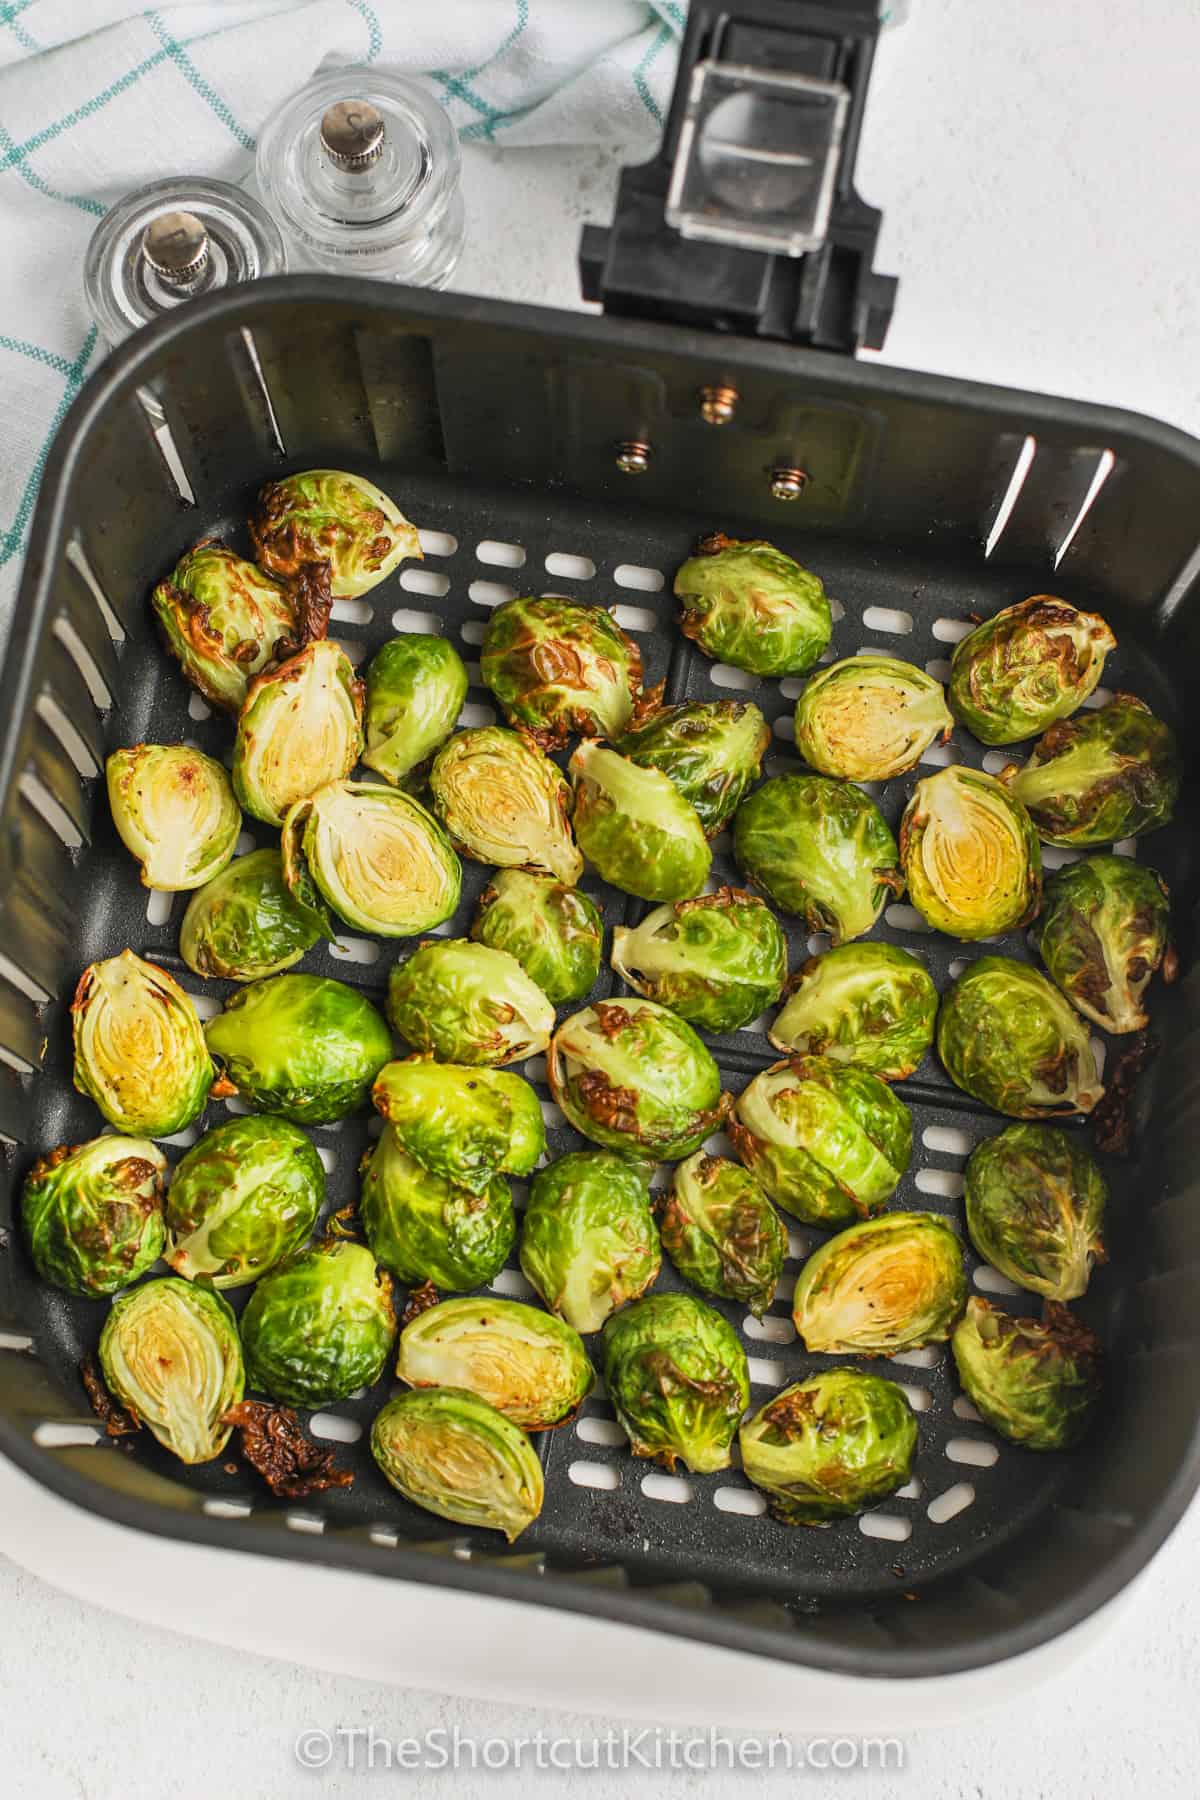 baked Air Fryer Brussel Sprouts Recipe in the air fryer